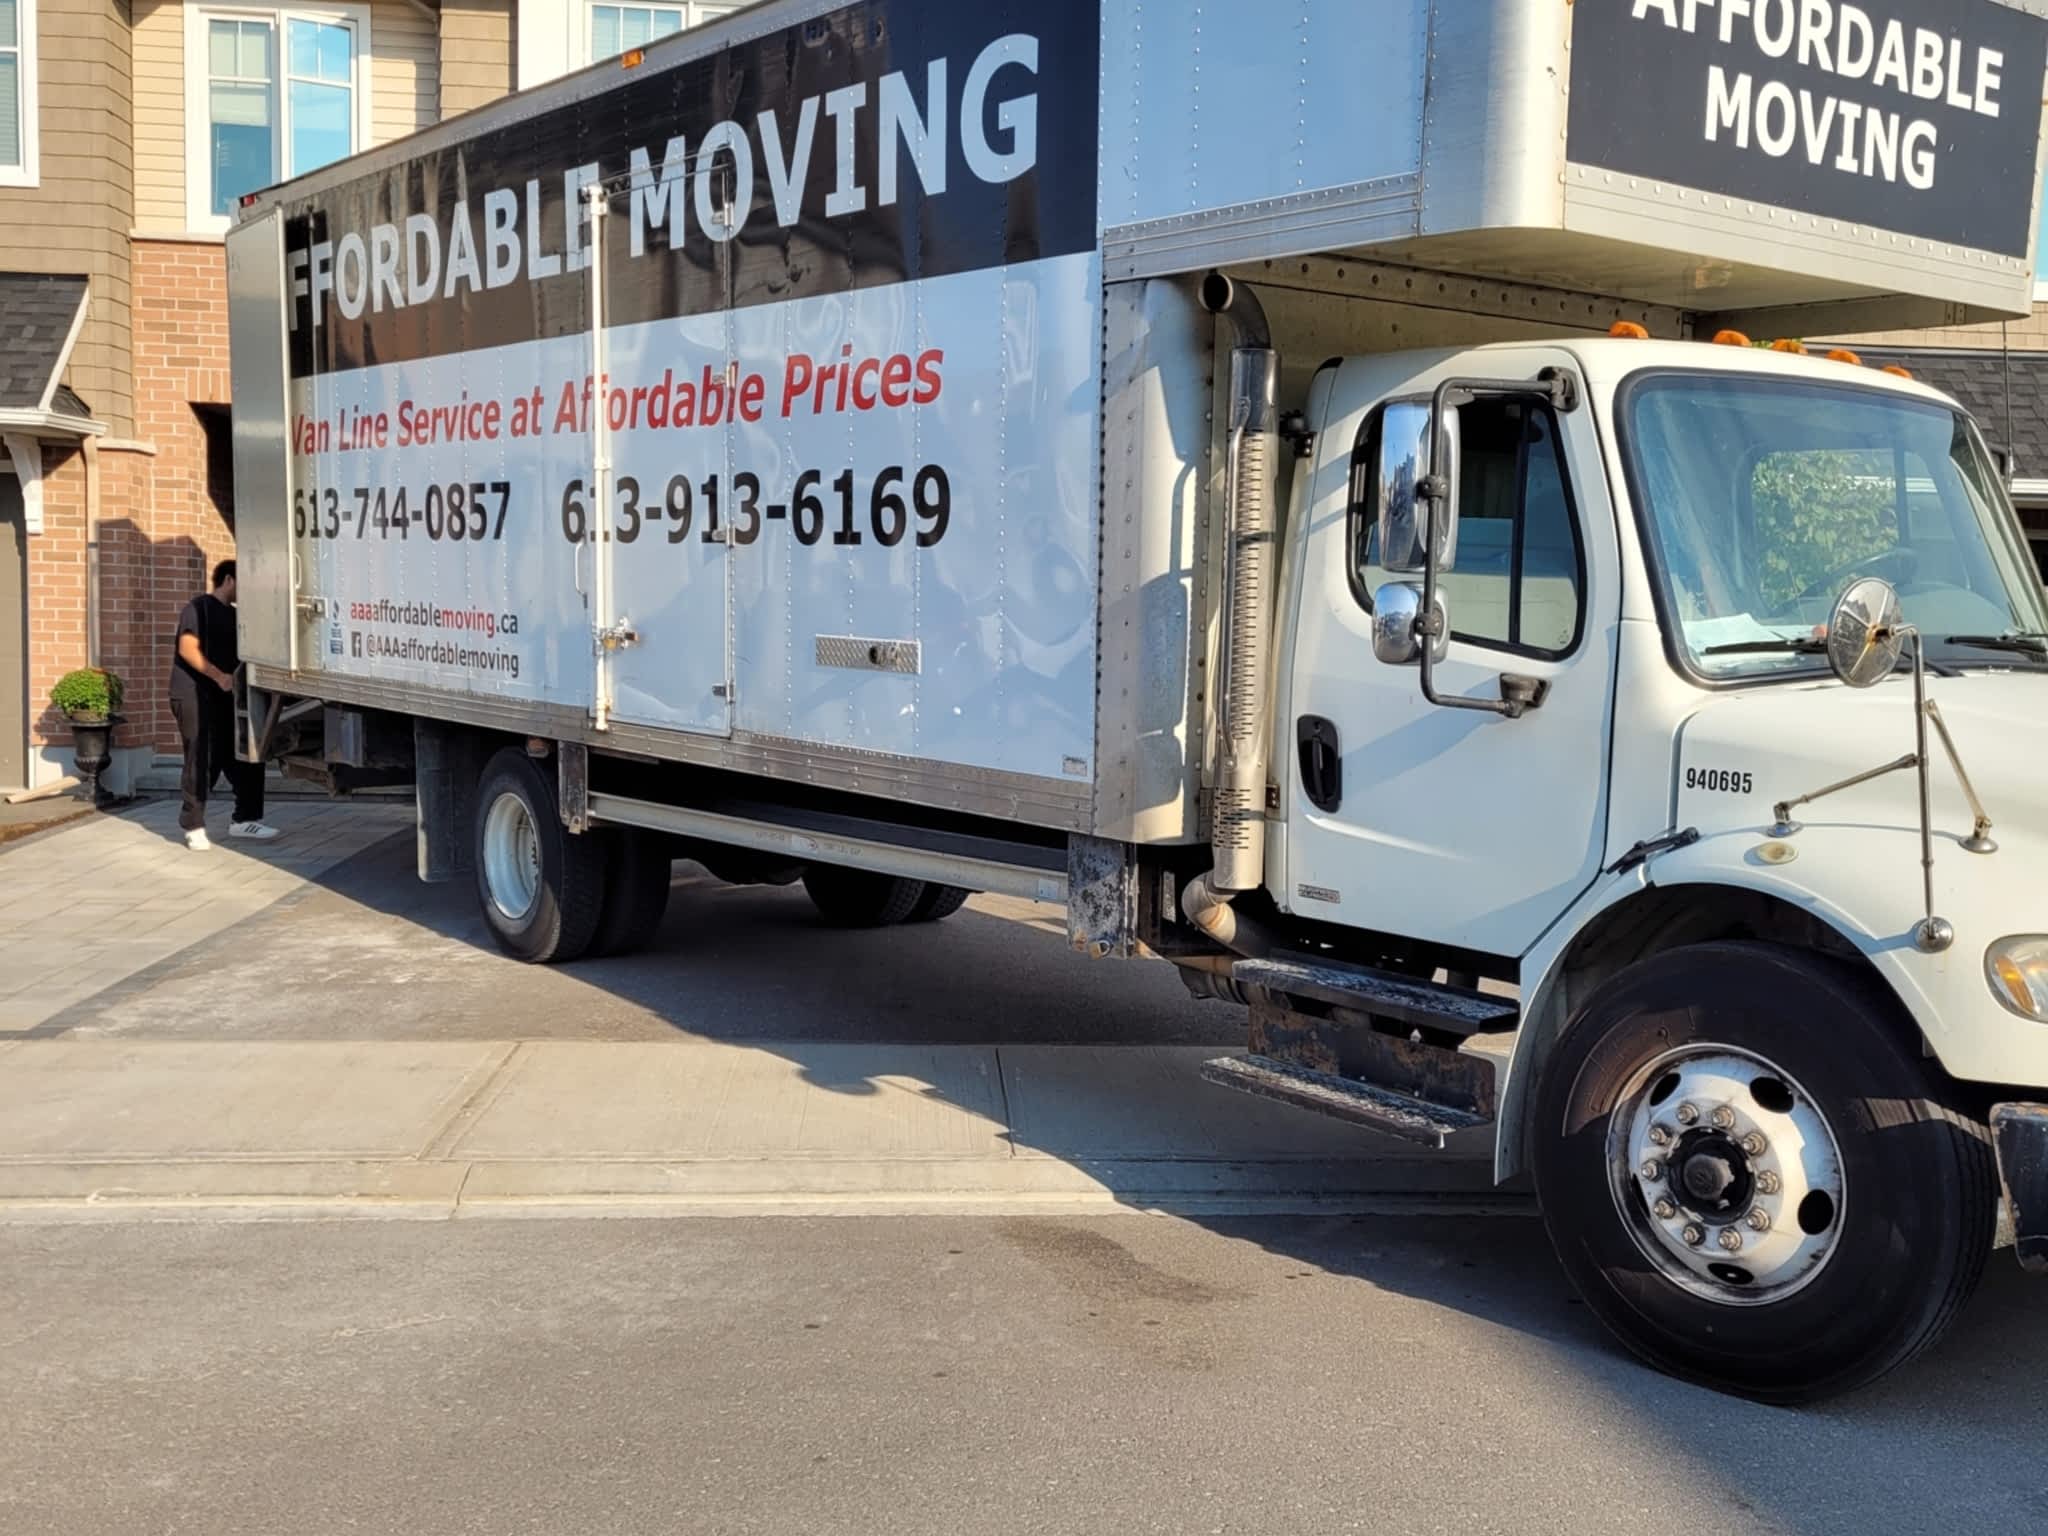 photo Affordable Moving